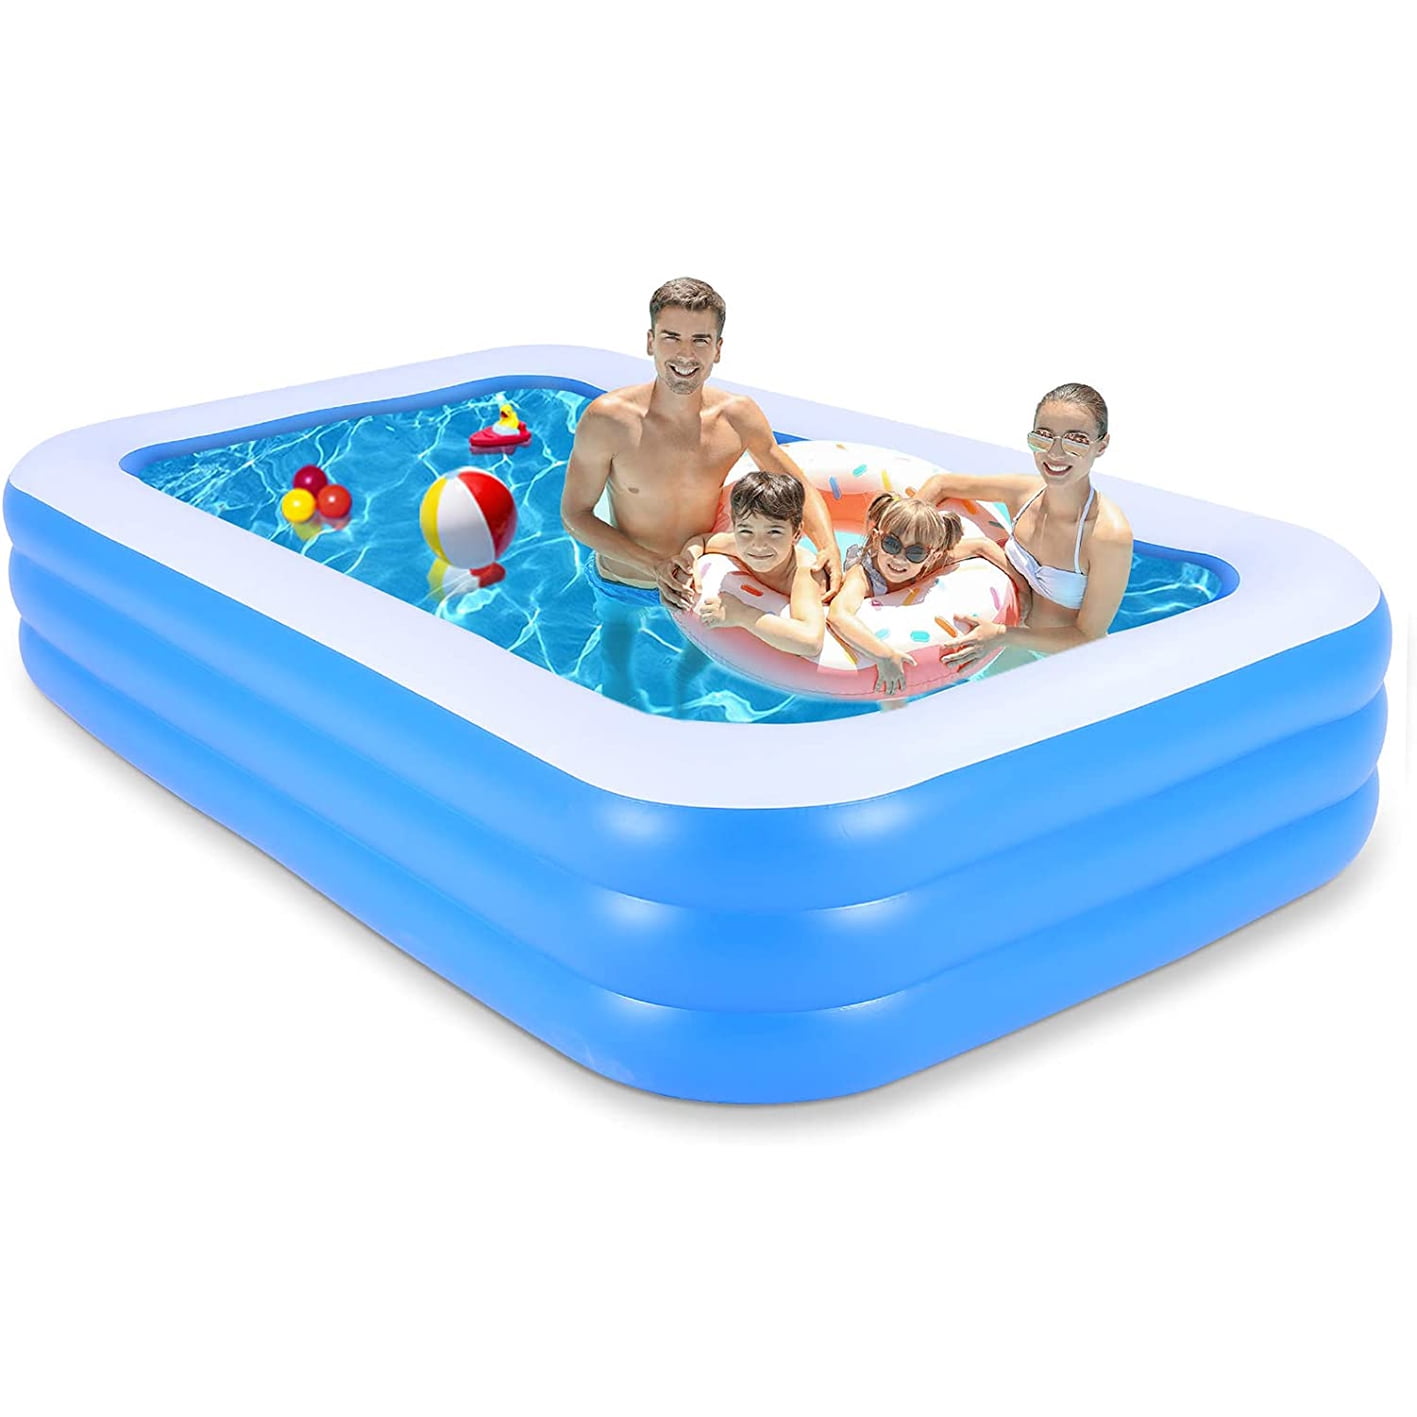 Kids Backyard Summer Printed 59x43.3x19.6 Outdoor XINAN-US Inflatable Swimming Pools Resistant Family Kiddle Pool Full-Sized Lounge Pool for Garden